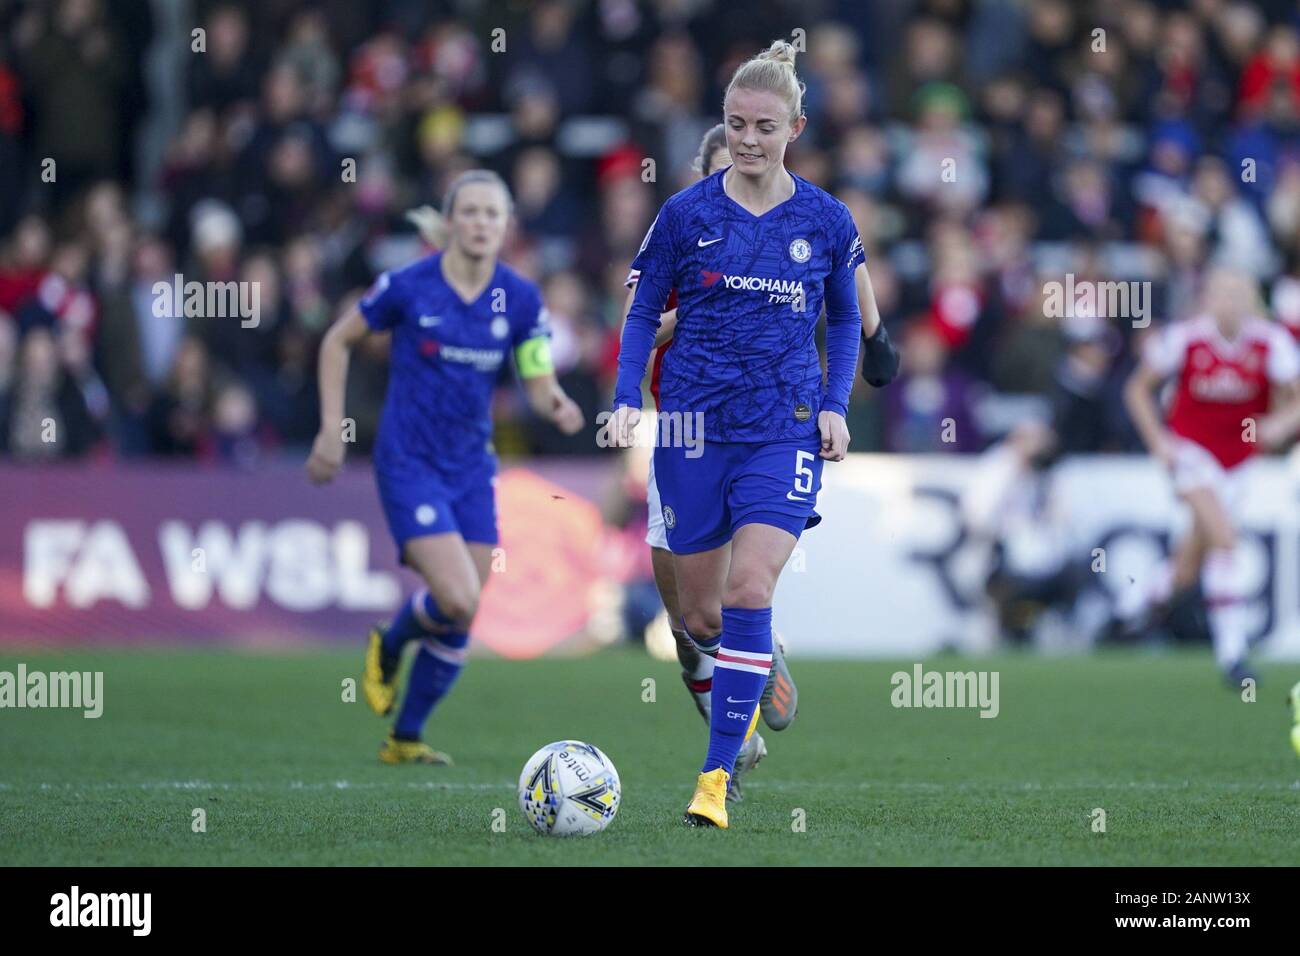 BOREHAMWOOD, ENGLAND - JANUARY 19: Sophie Ingle of Chelsea in action during the Barclays FA Women's Super League football match between Arsenal Women and Chelsea Women at Meadow Park in Borehamwood, England on 19 January 2020. (Foto: Daniela Porcelli/Sports Press Photo/Alamy) Stock Photo